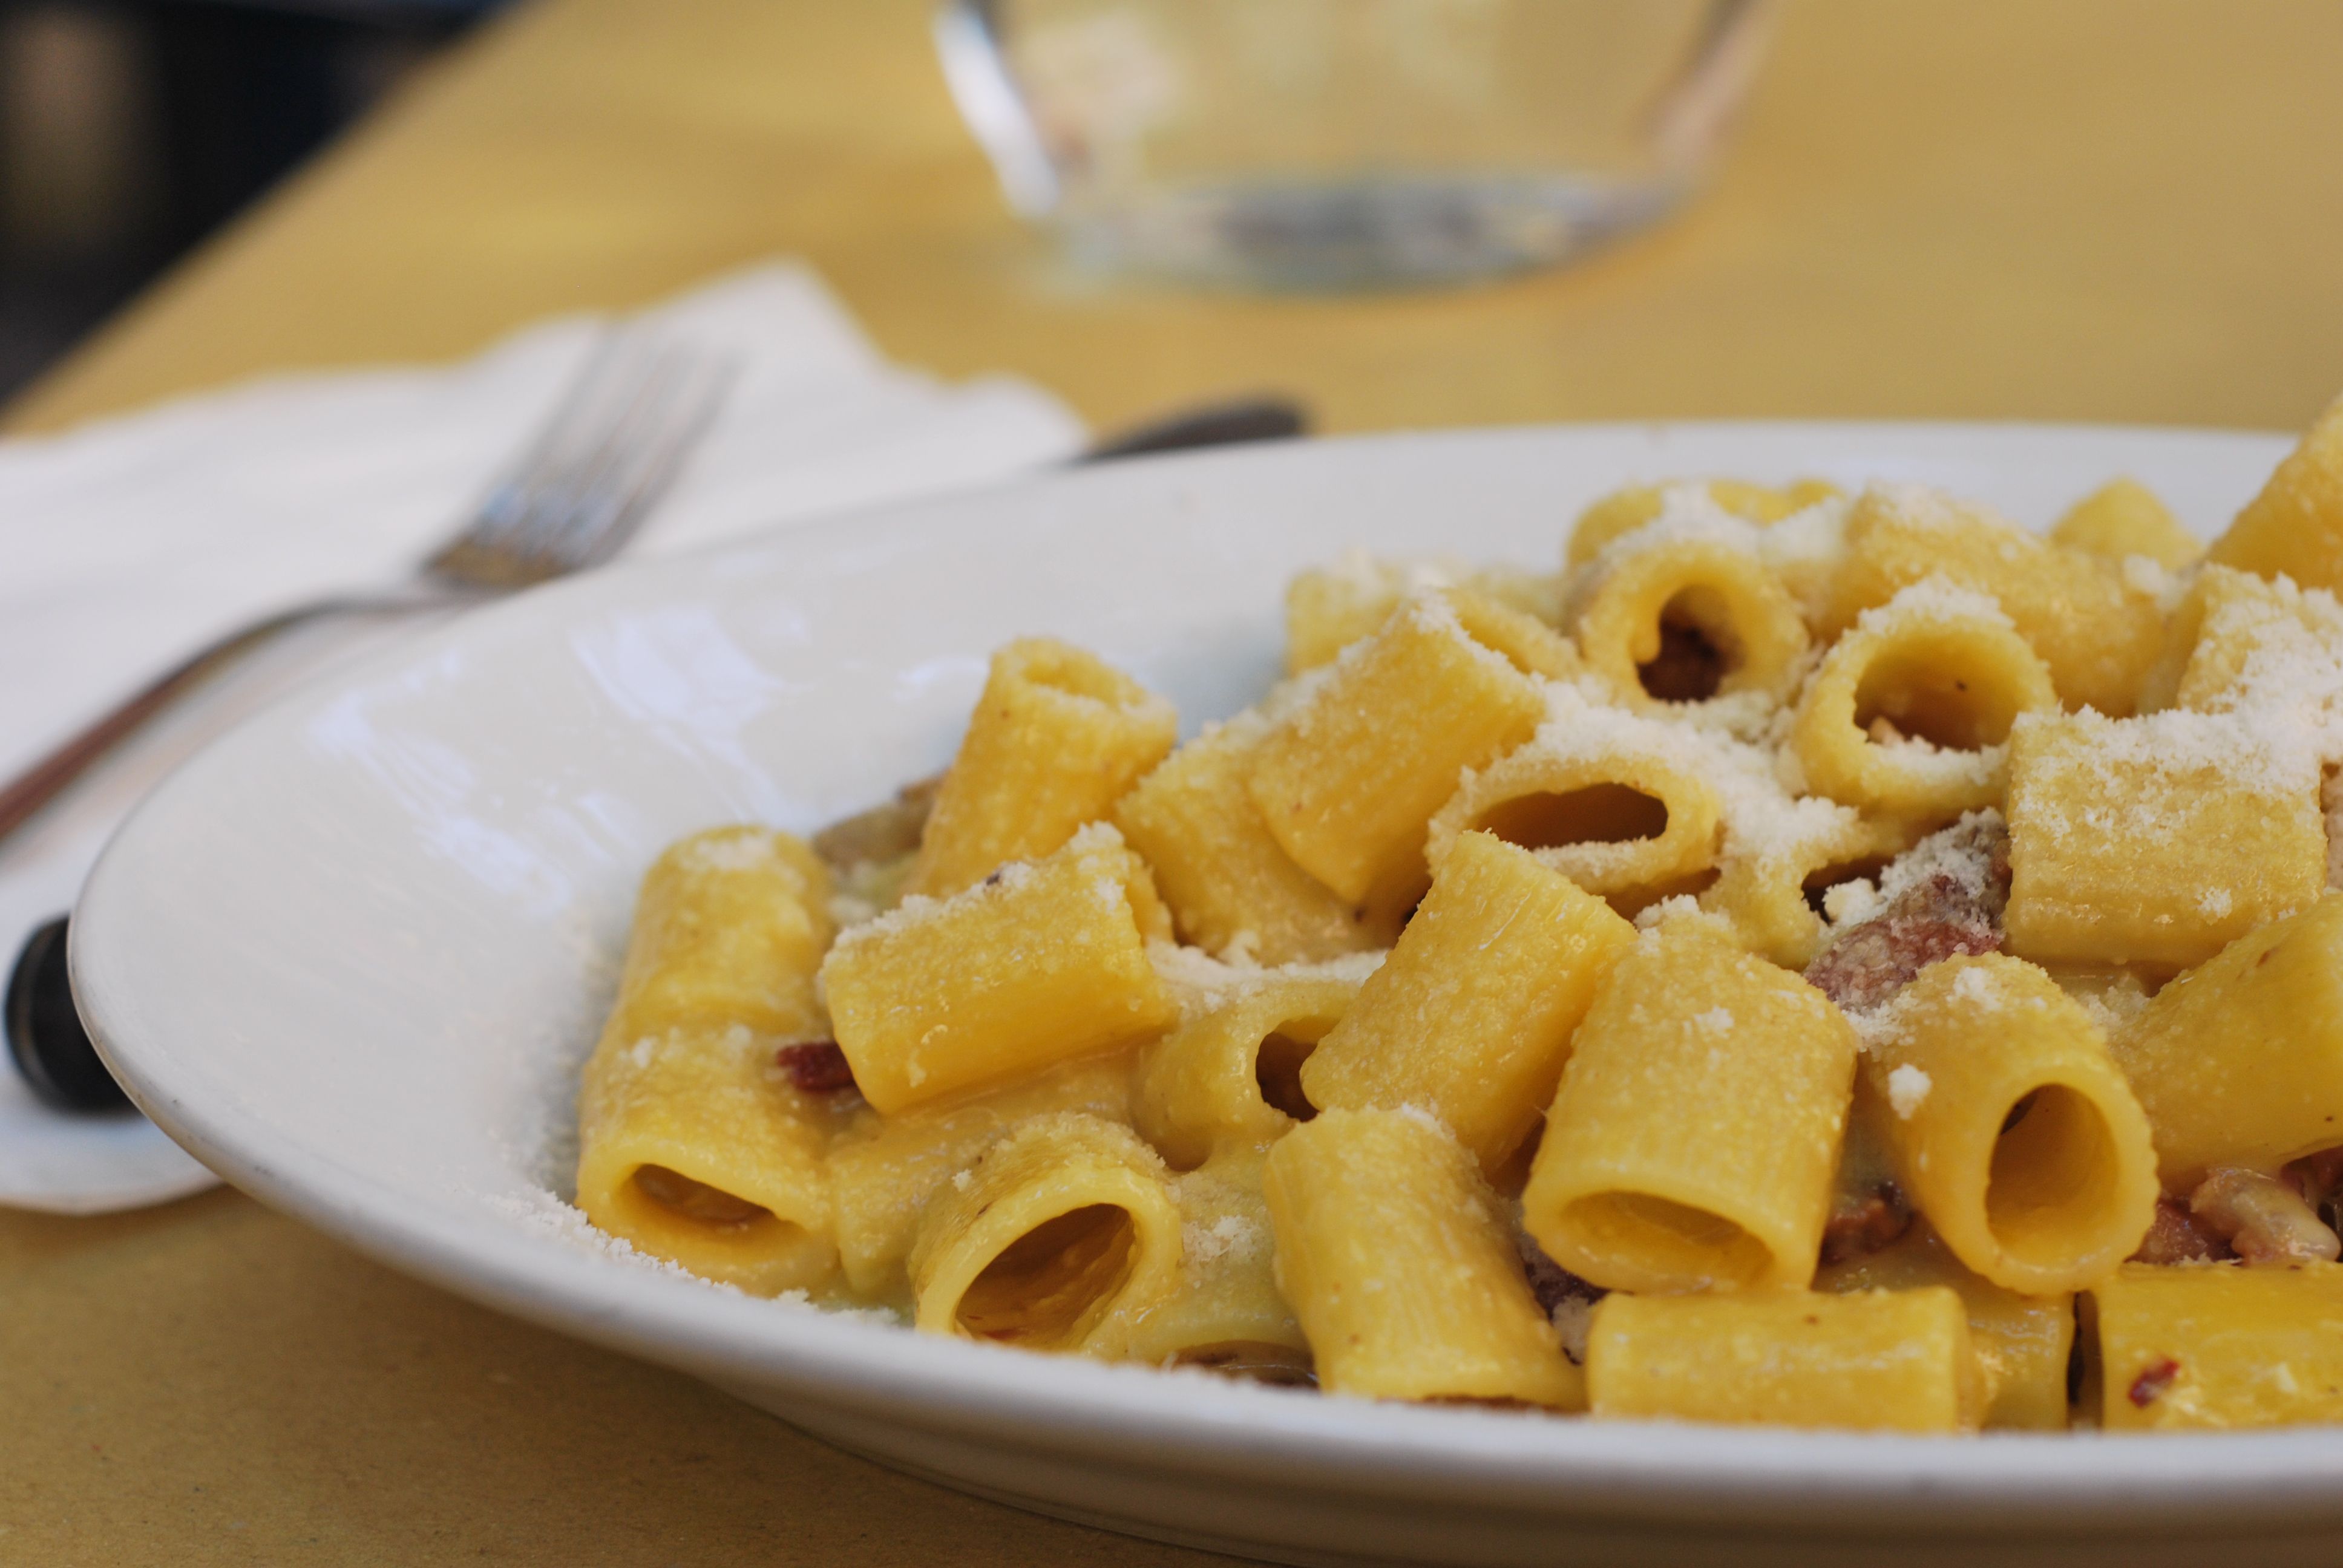 15 Things You Should Order at a Restaurant in Rome